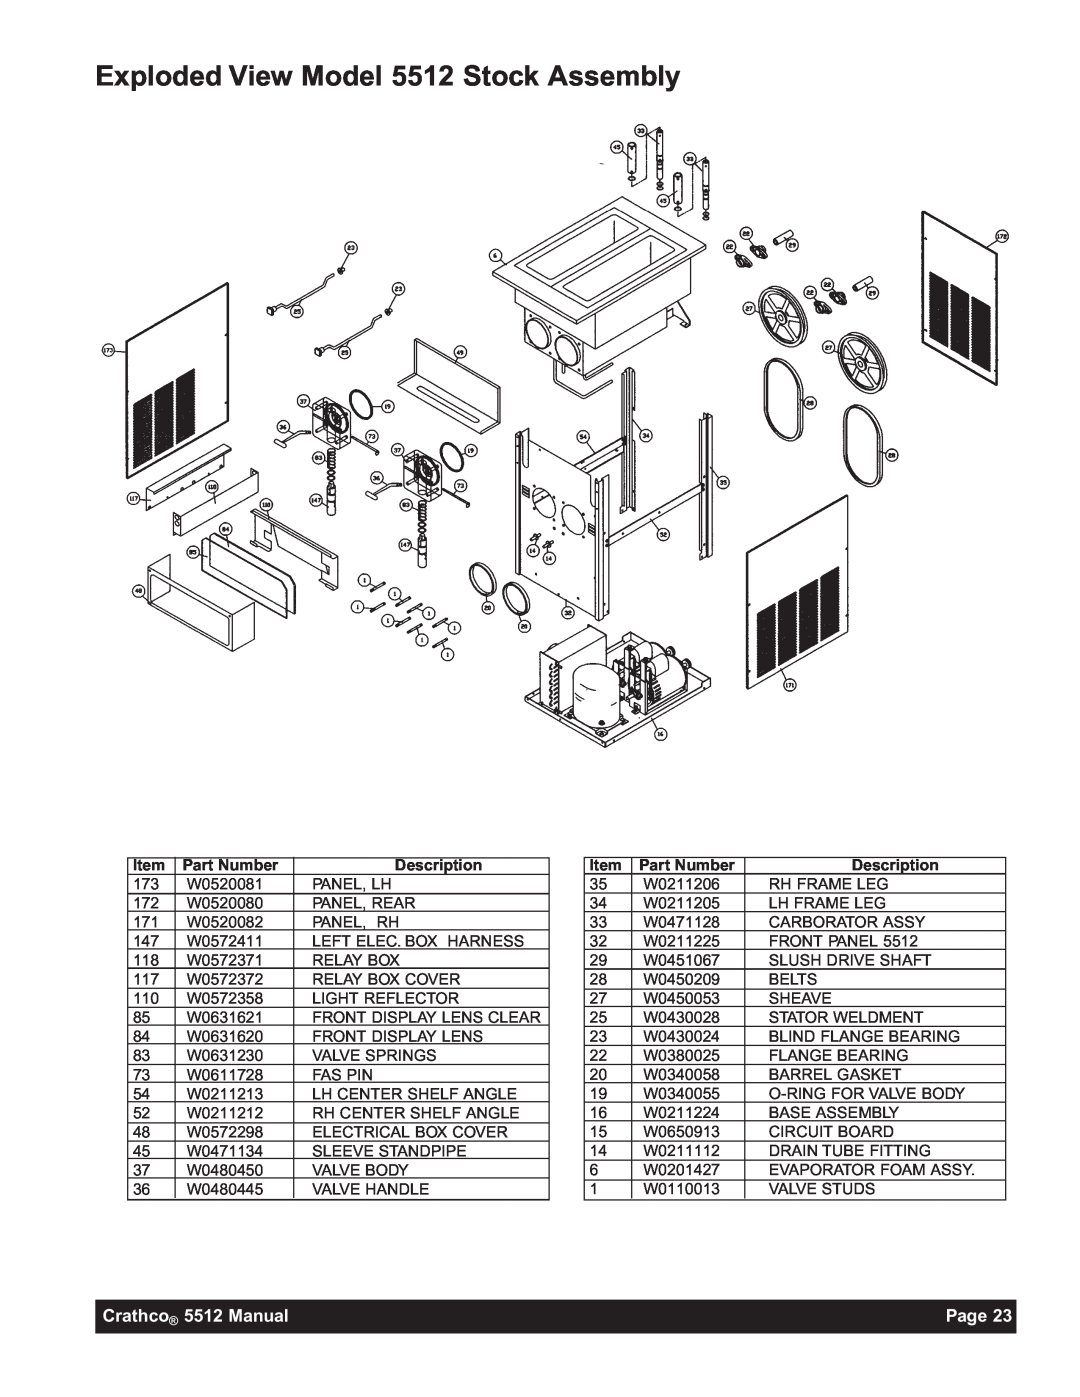 Grindmaster 5512E instruction manual Exploded View Model 5512 Stock Assembly, Crathco 5512 Manual, Page 